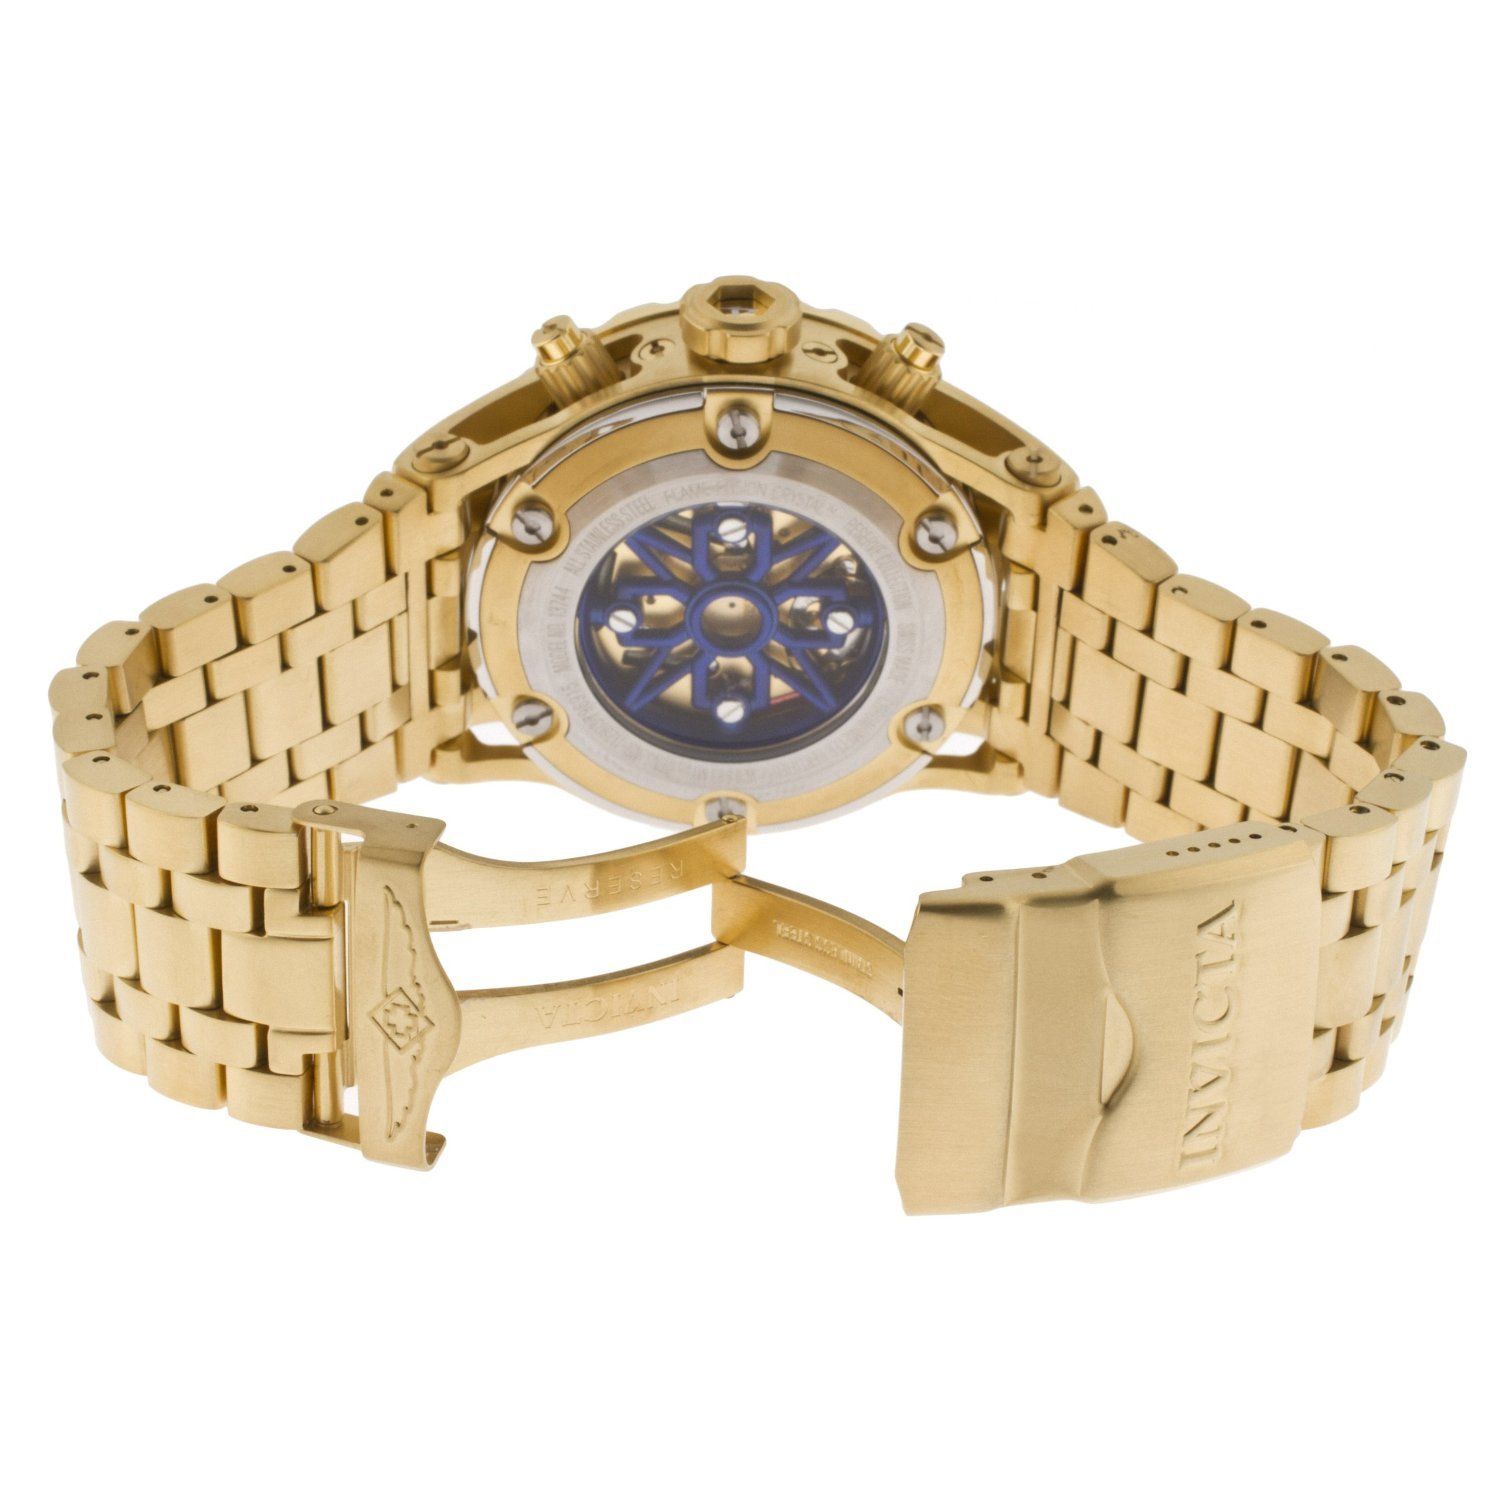 Invicta Reserve 1568 Dive Watch Gold Chronograph,boxed all papers included along with price- $4995 - Image 6 of 9